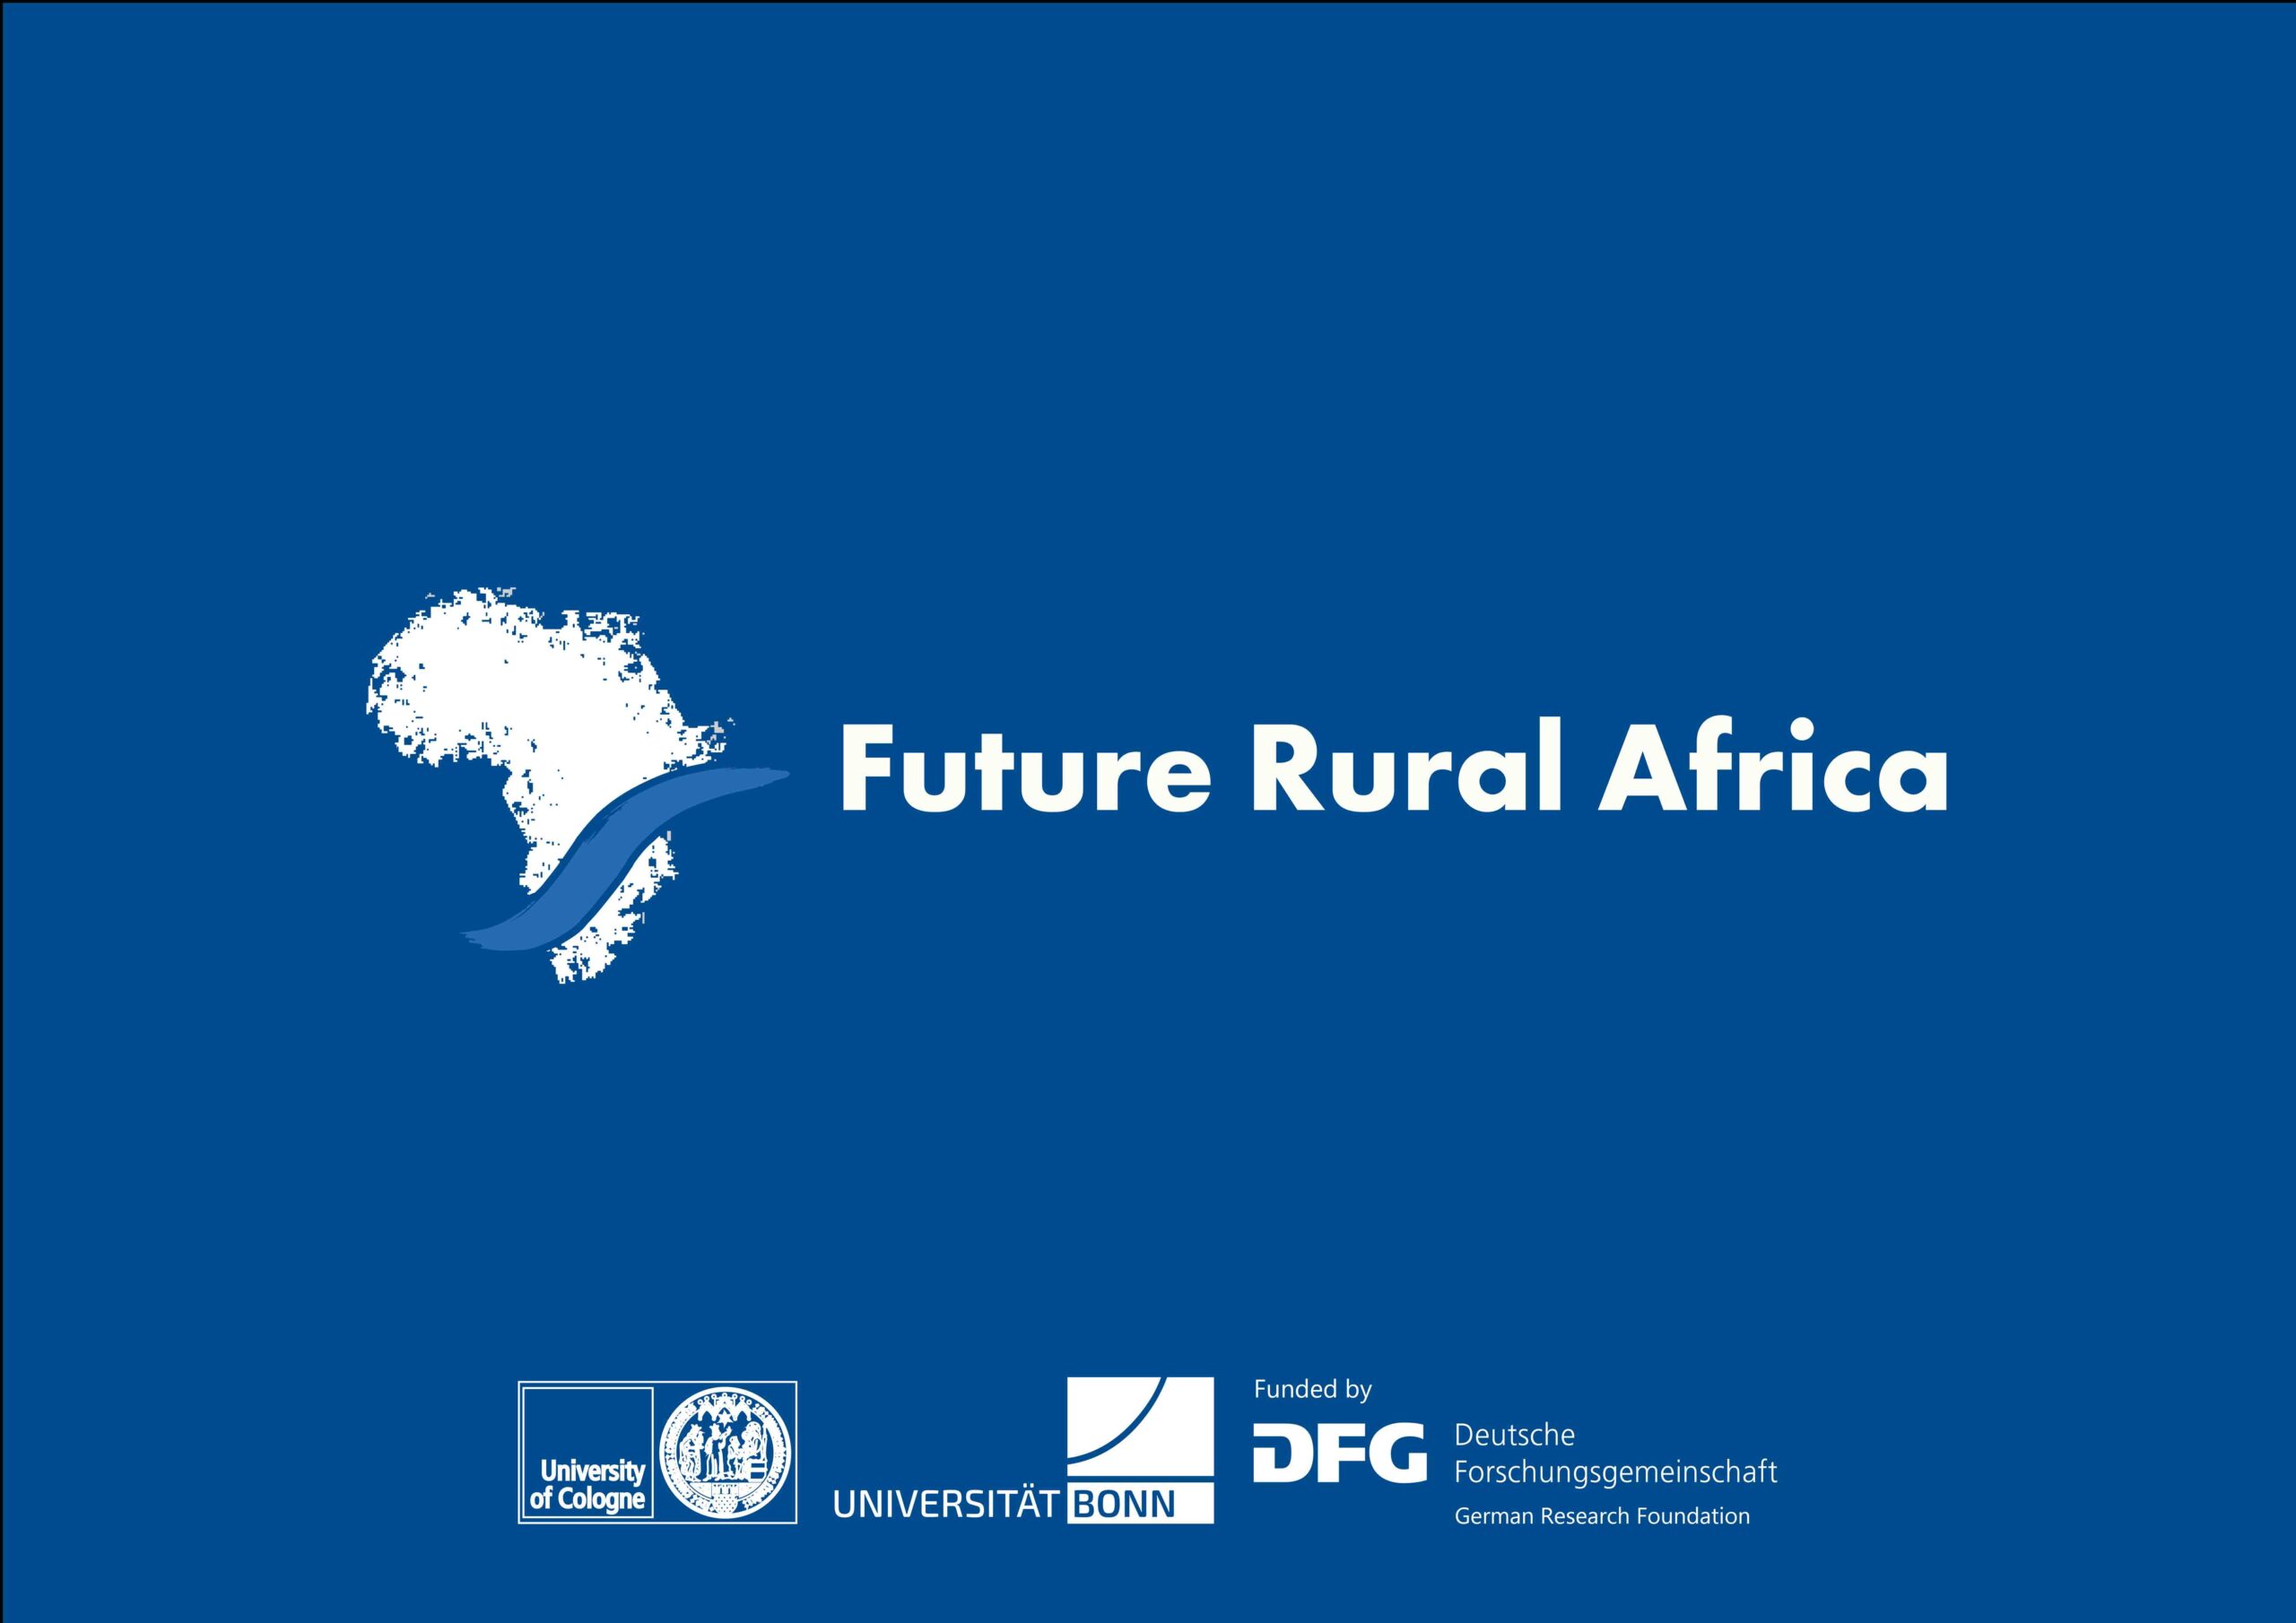 A cover image with the logo of the crc future rural africa